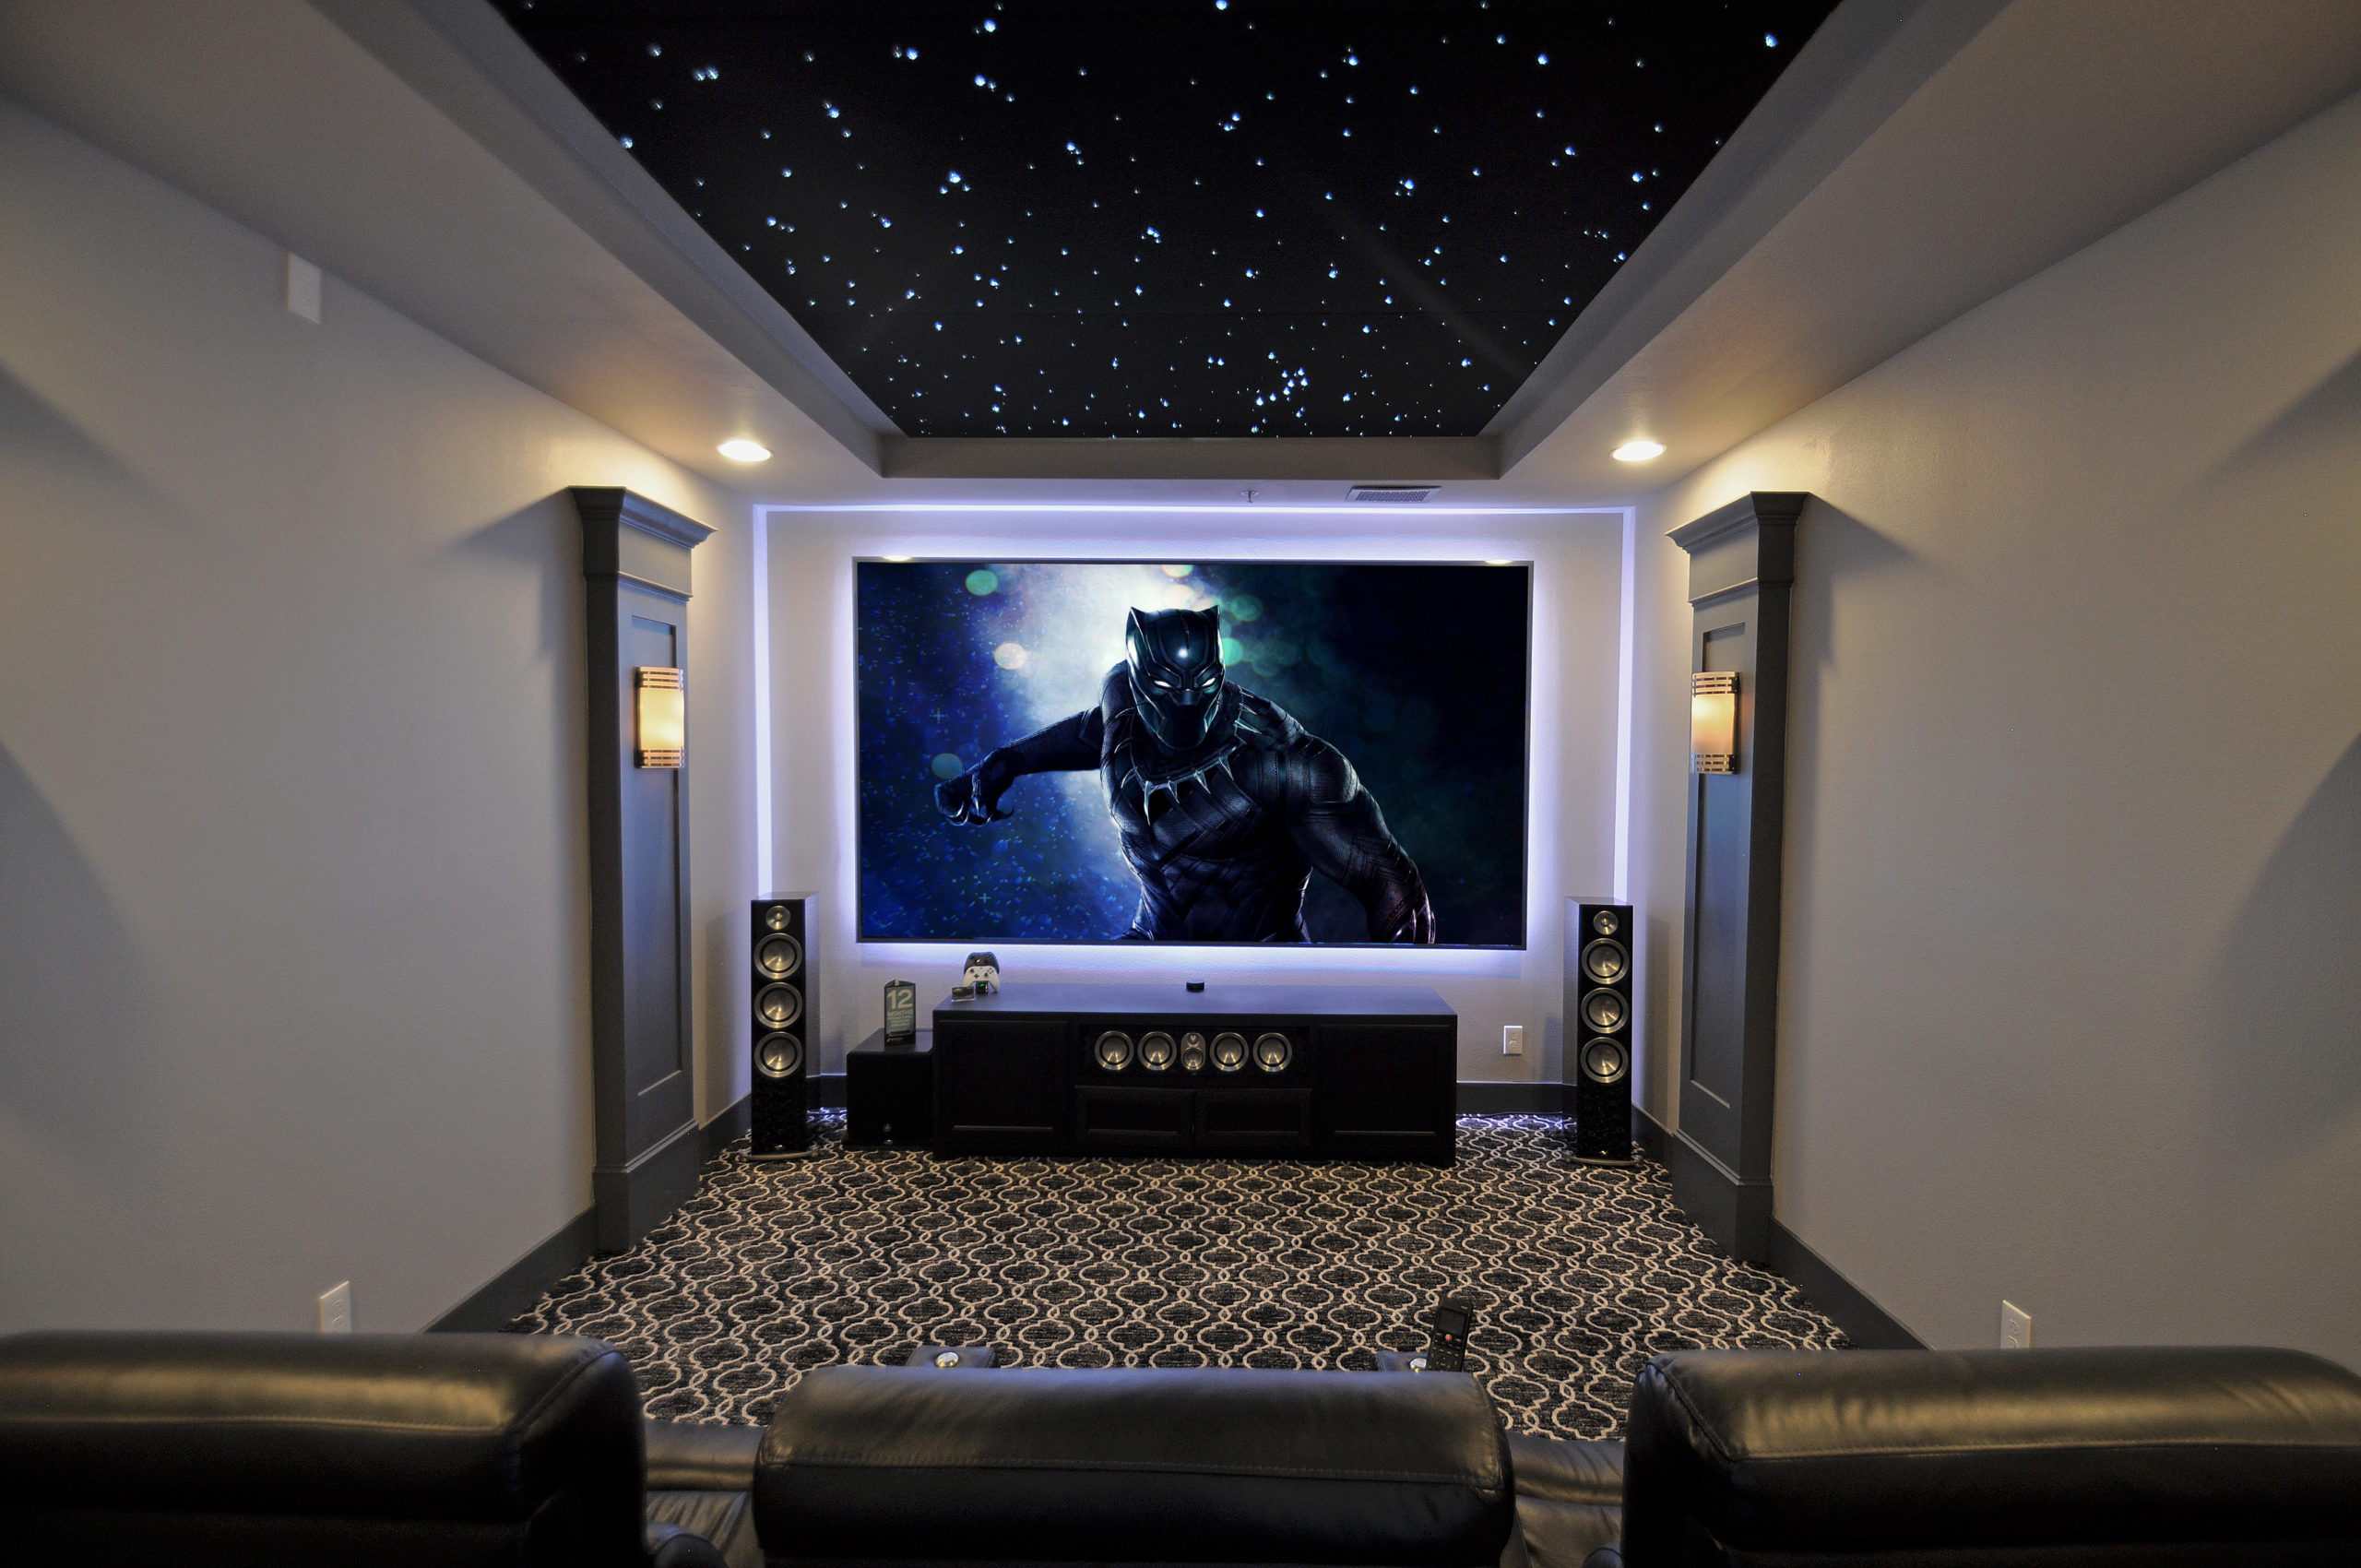 Best Home Theater Interior Design Seat Use The Design Of The Chair